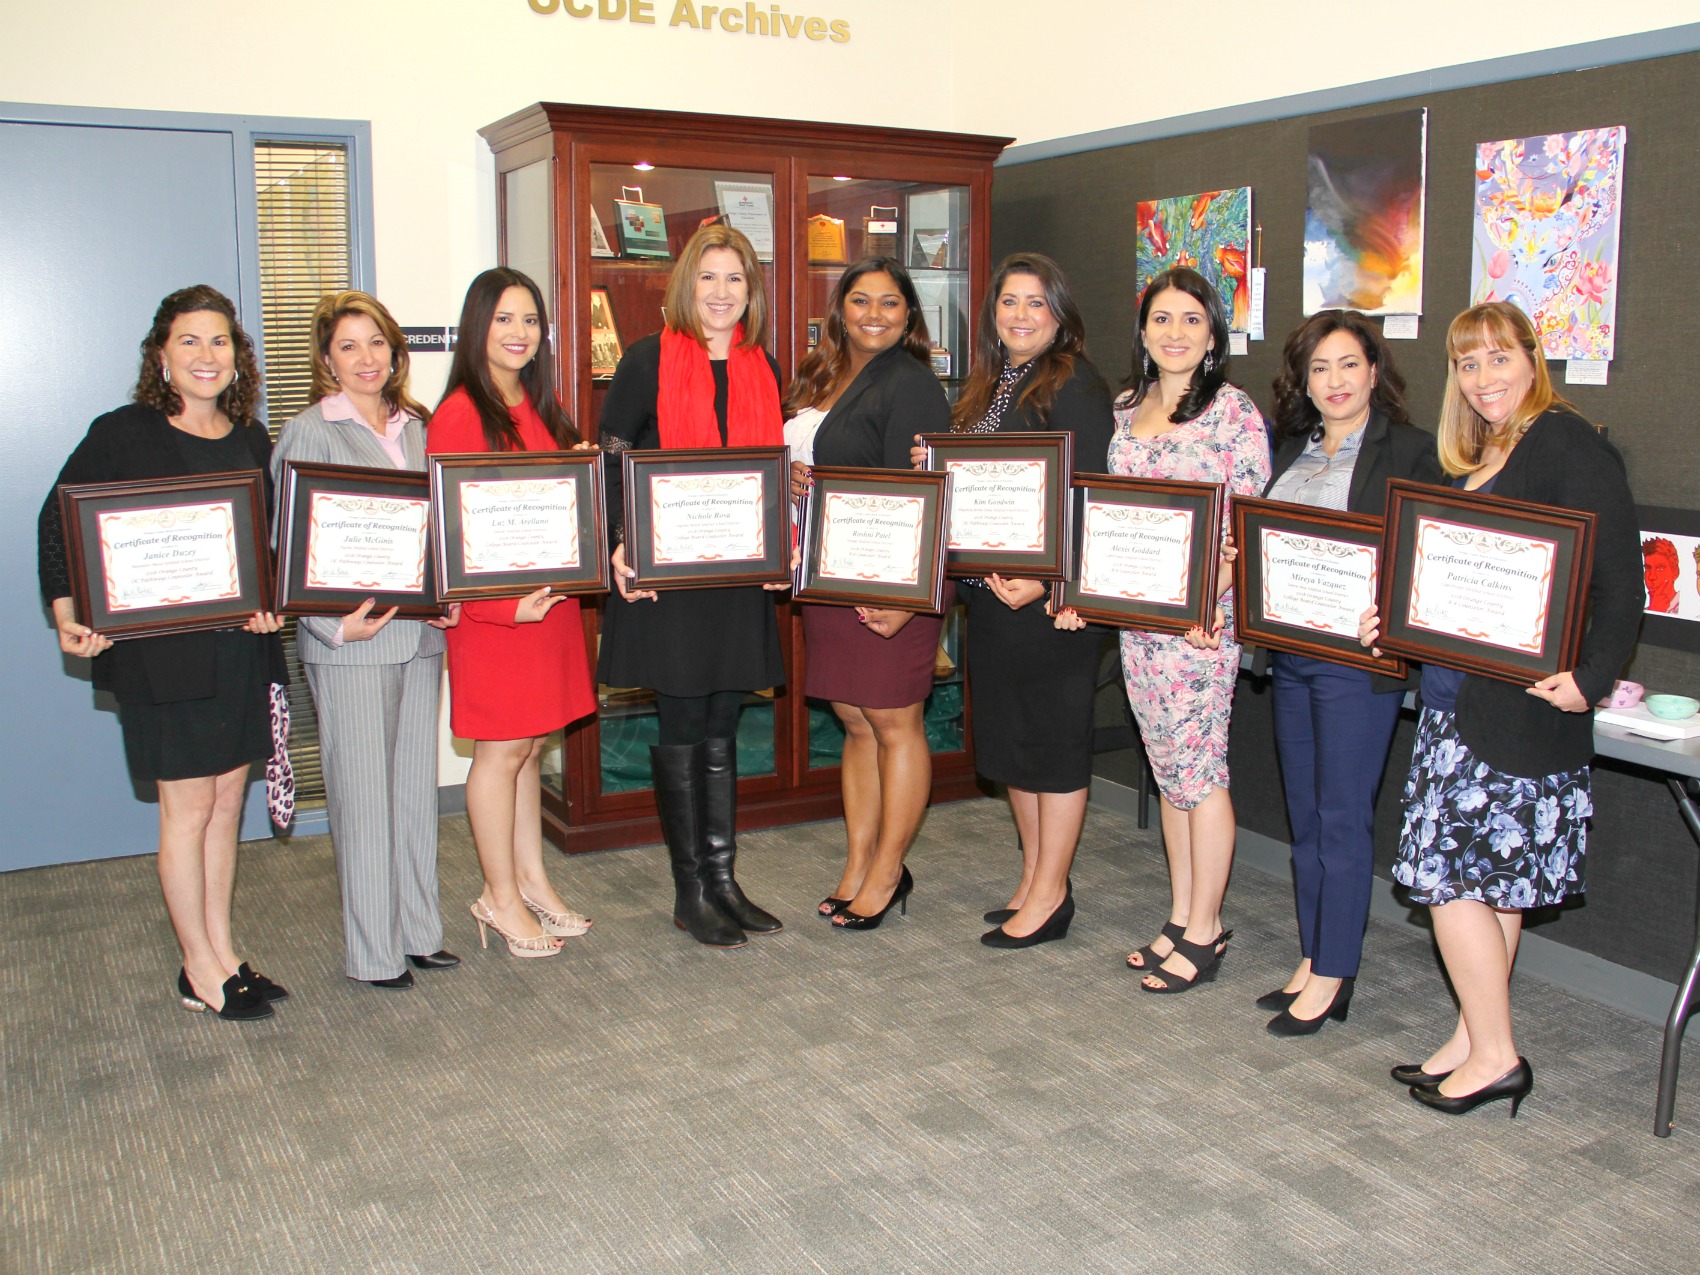 Counselors honored through OCDE's Counselor Recognition Program